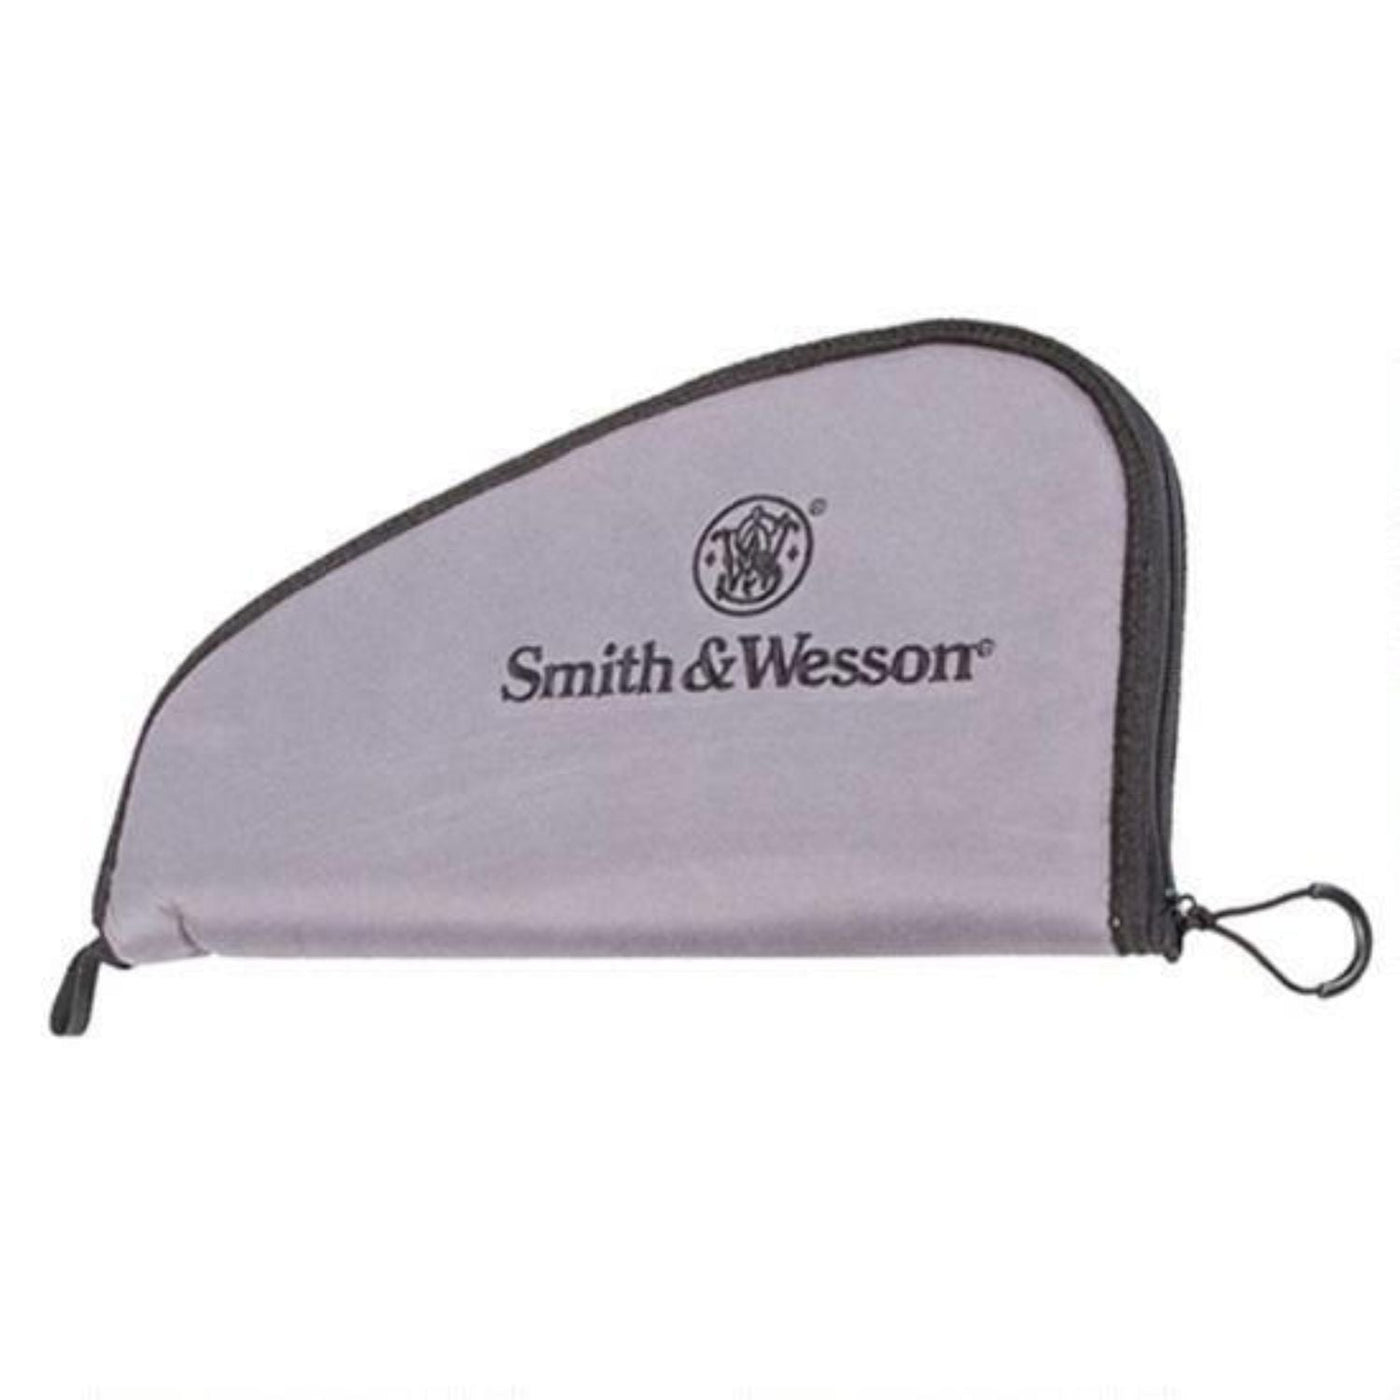 M&P by Smith & Wesson M and P Accessories Defender Handgun Case Medium Shooting